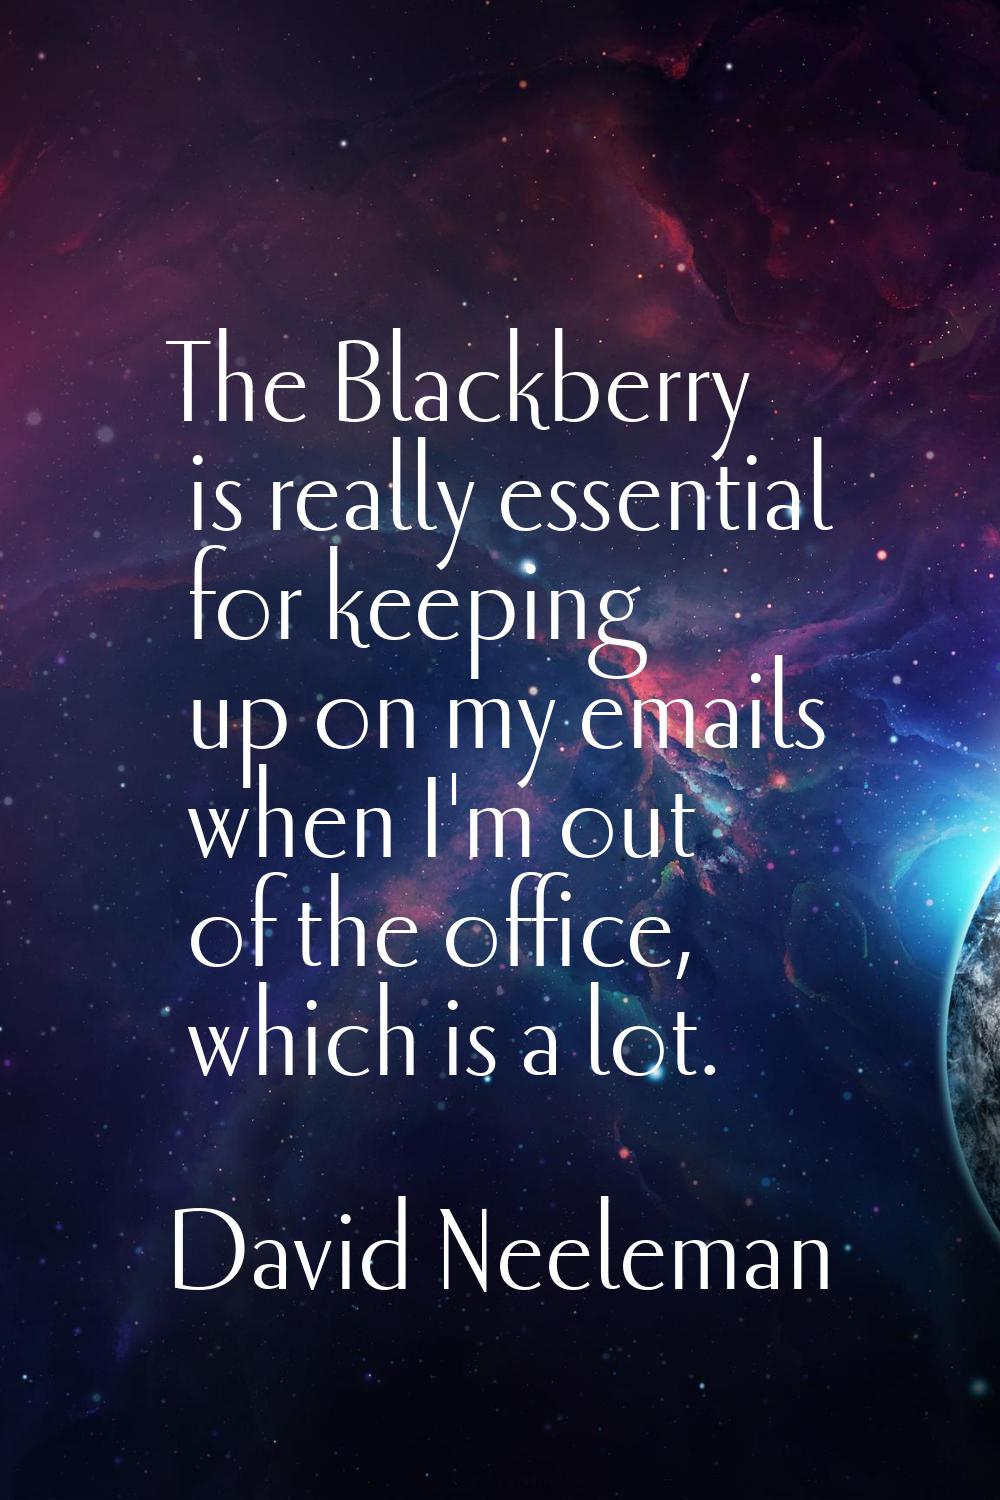 The Blackberry is really essential for keeping up on my emails when I'm out of the office, which is